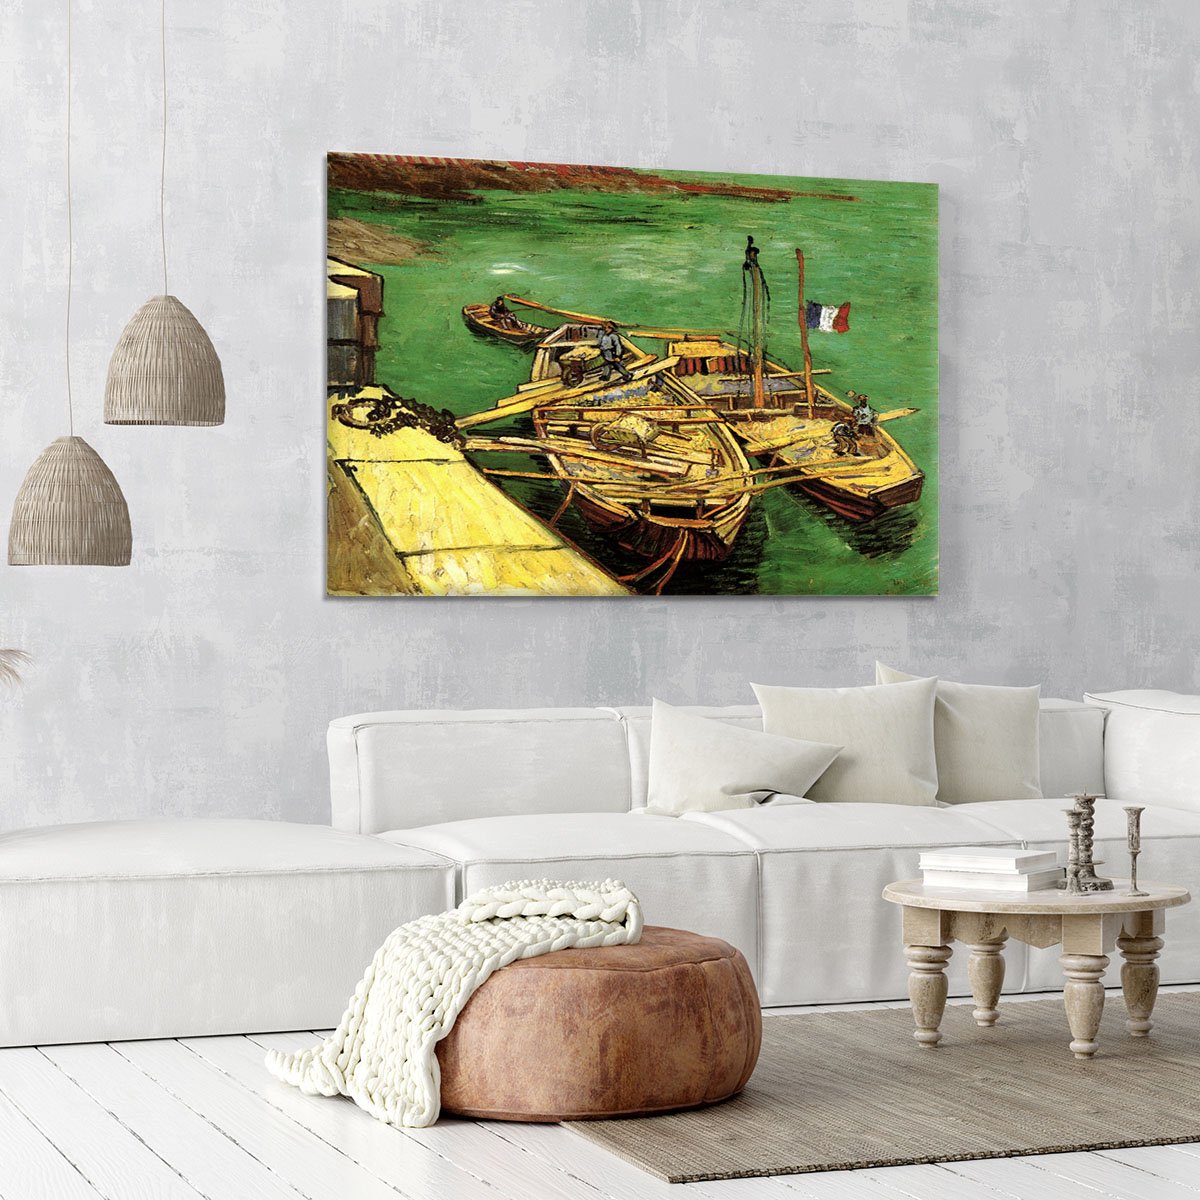 Quay with Men Unloading Sand Barges by Van Gogh Canvas Print or Poster